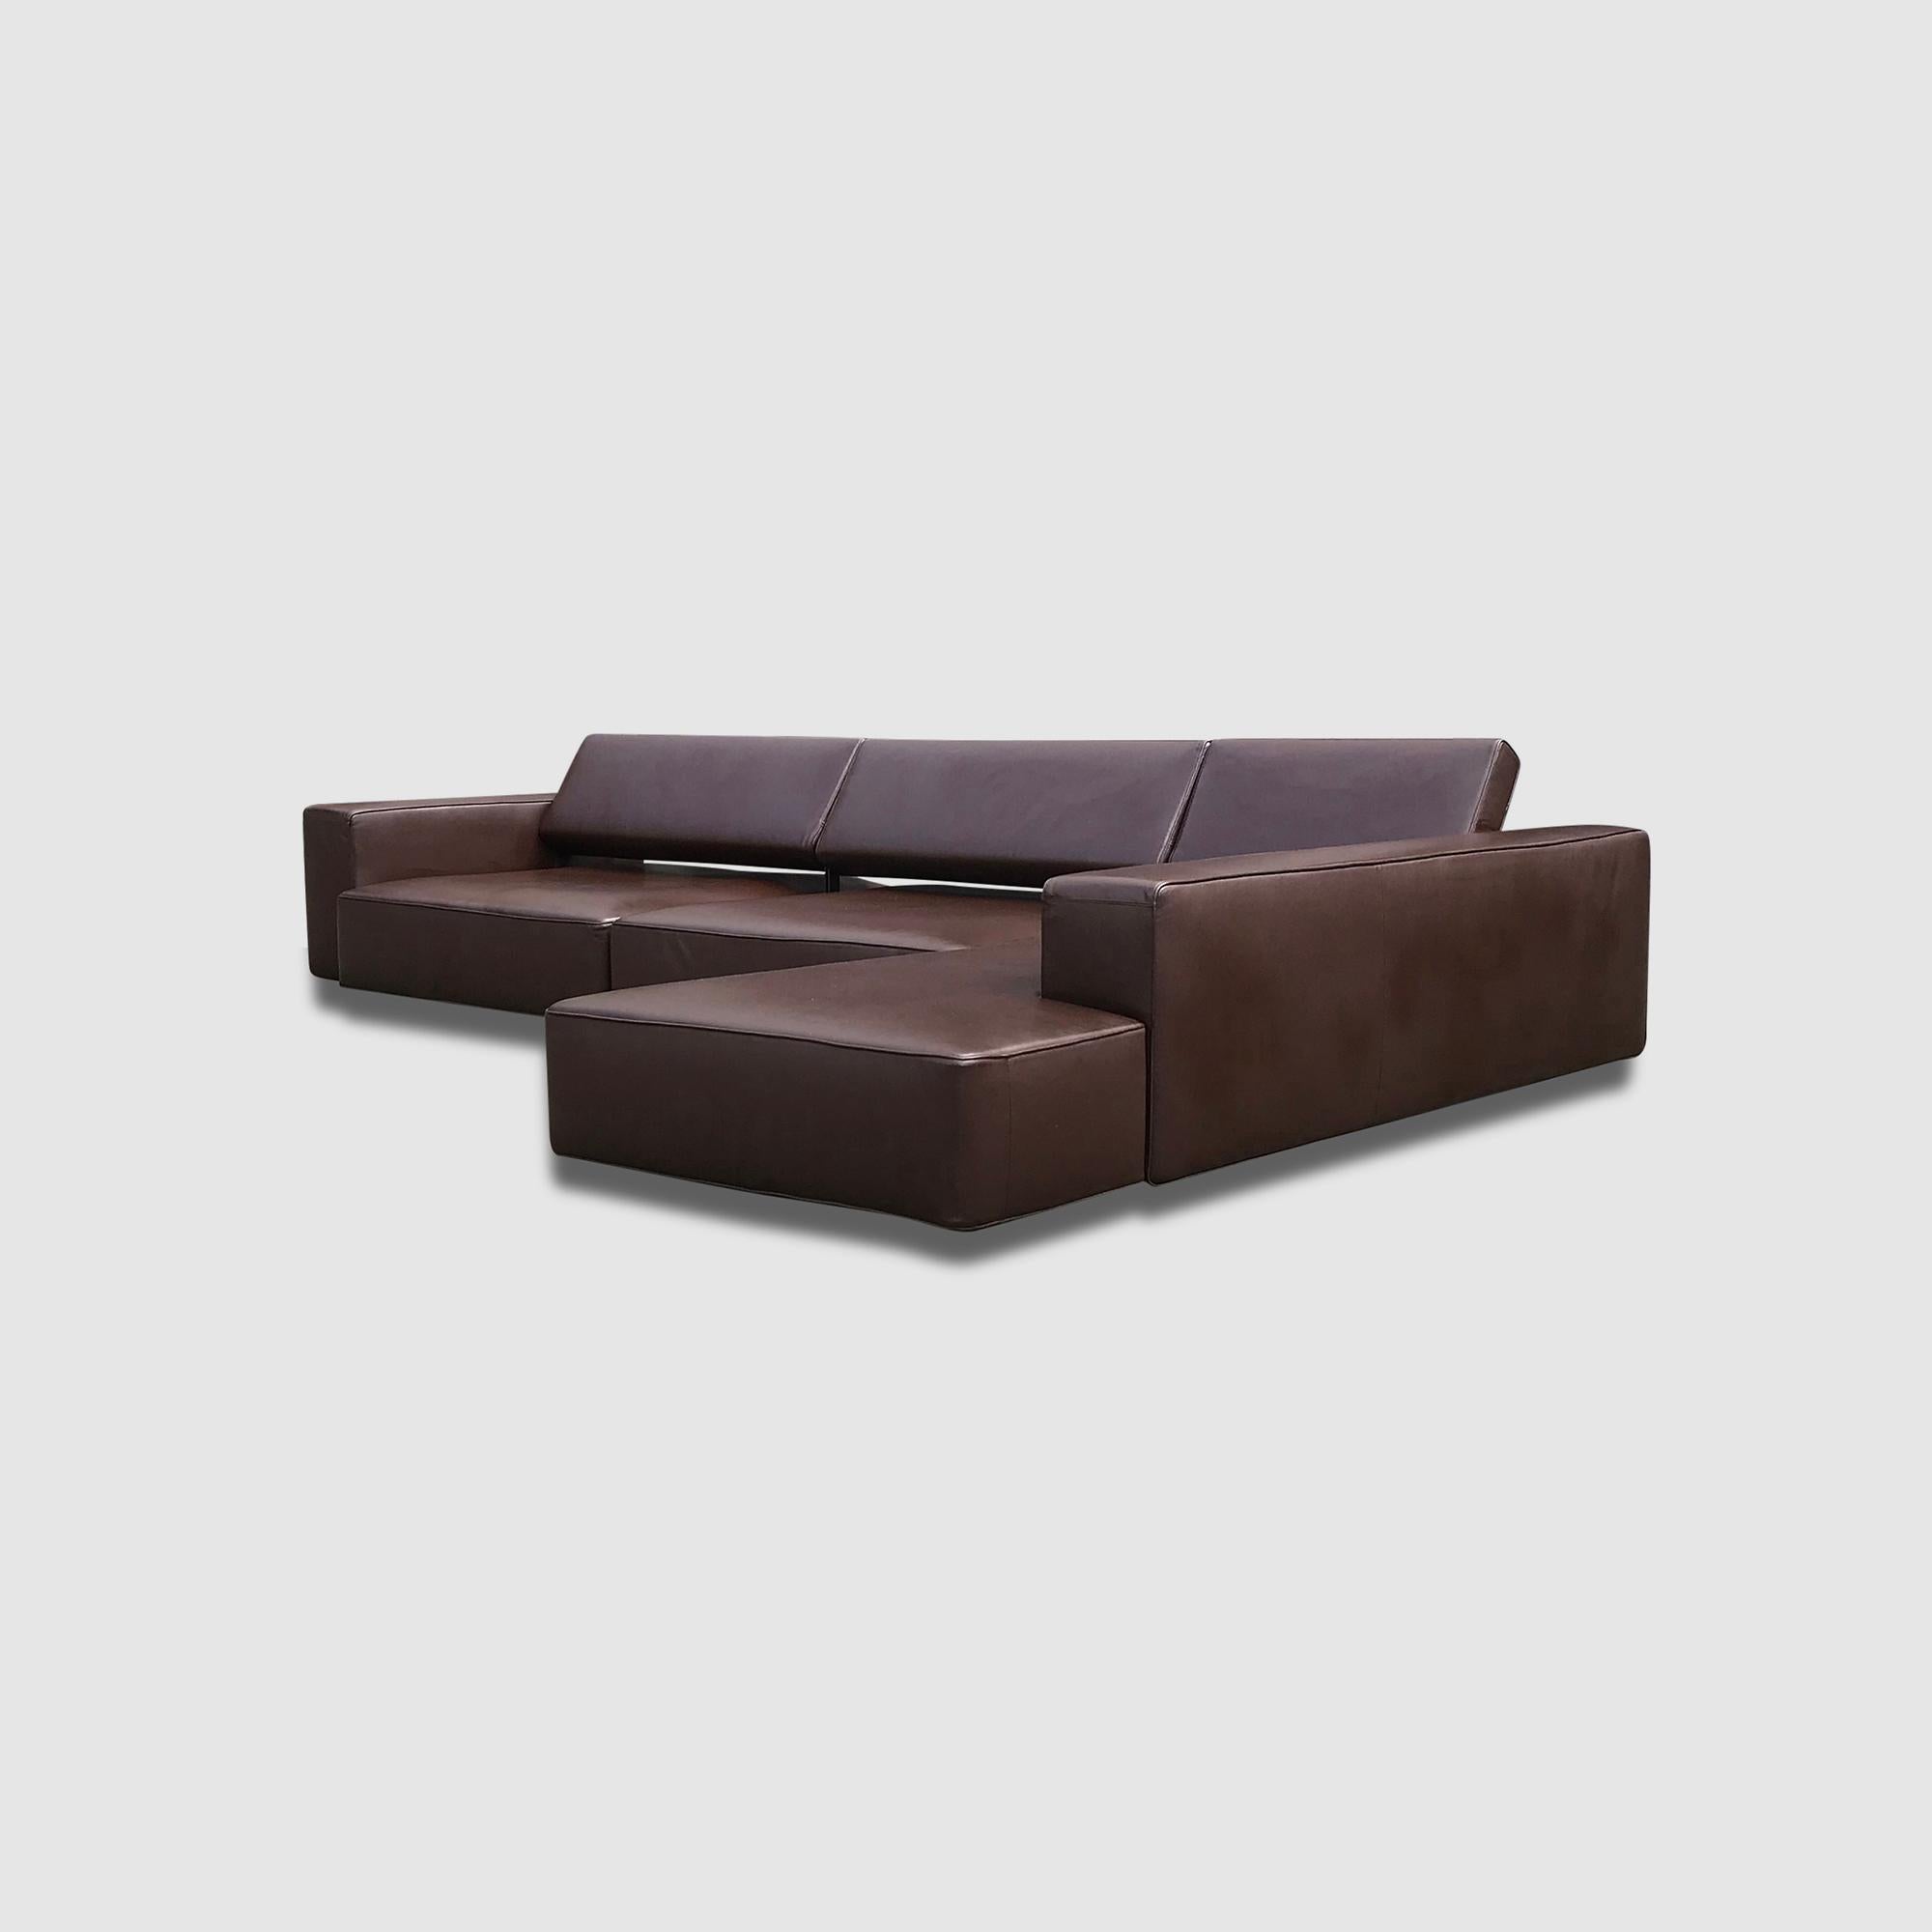 Modular Leather Andy Landscape Sofa by Paolo Piva for B&B Italia 2013 9